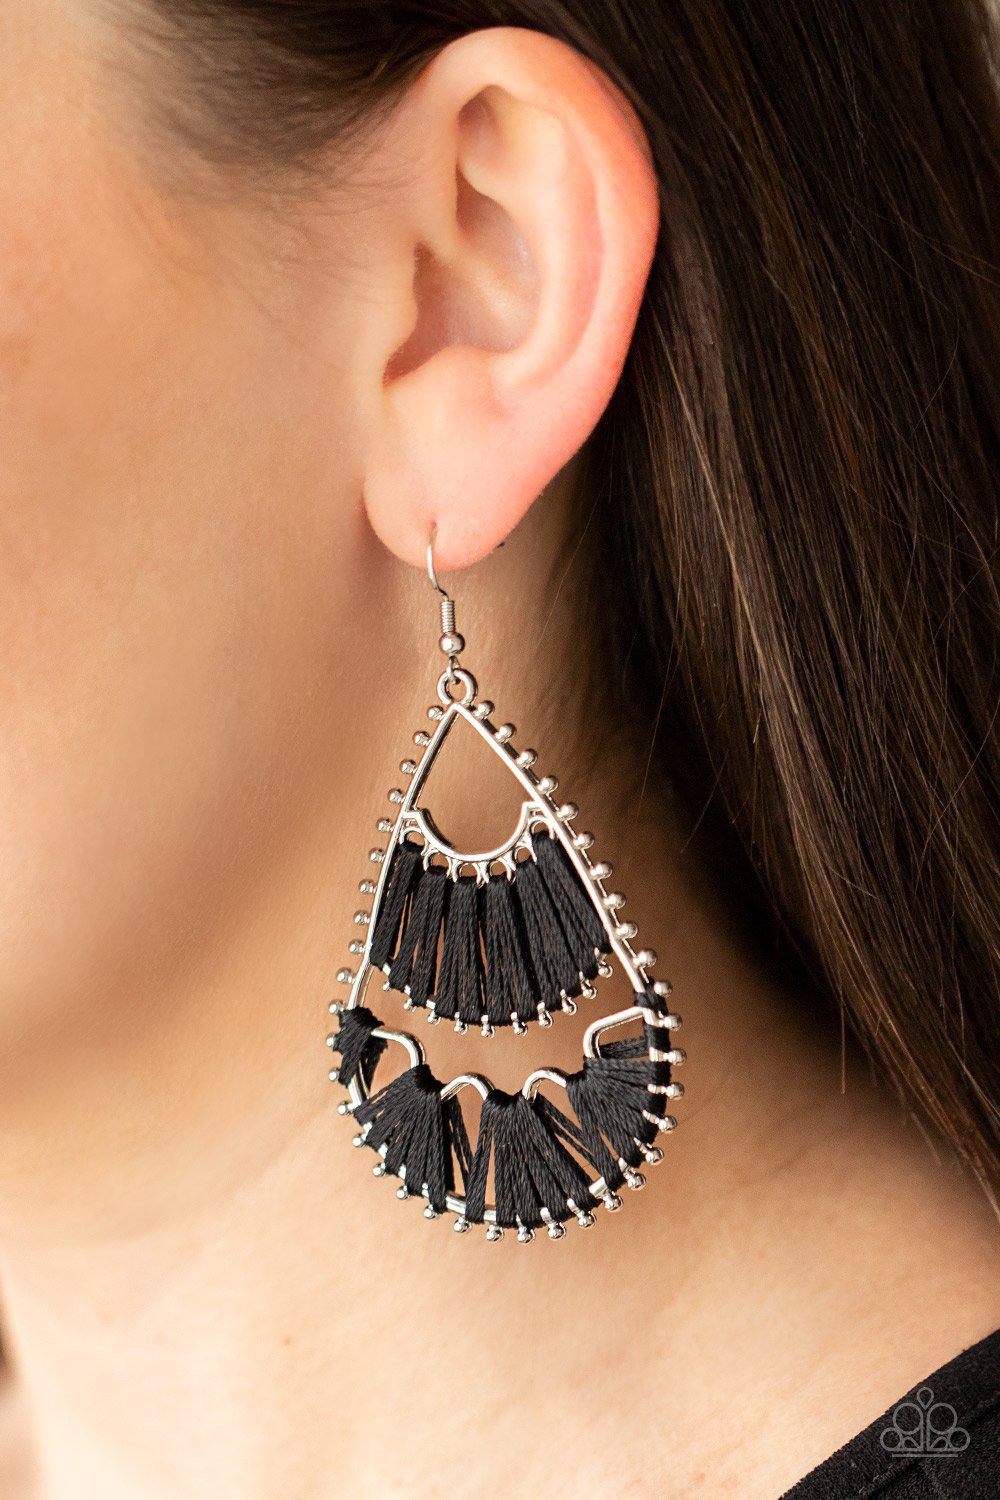 Samba Scene Black and Silver Earrings - Paparazzi Accessories- lightbox - CarasShop.com - $5 Jewelry by Cara Jewels